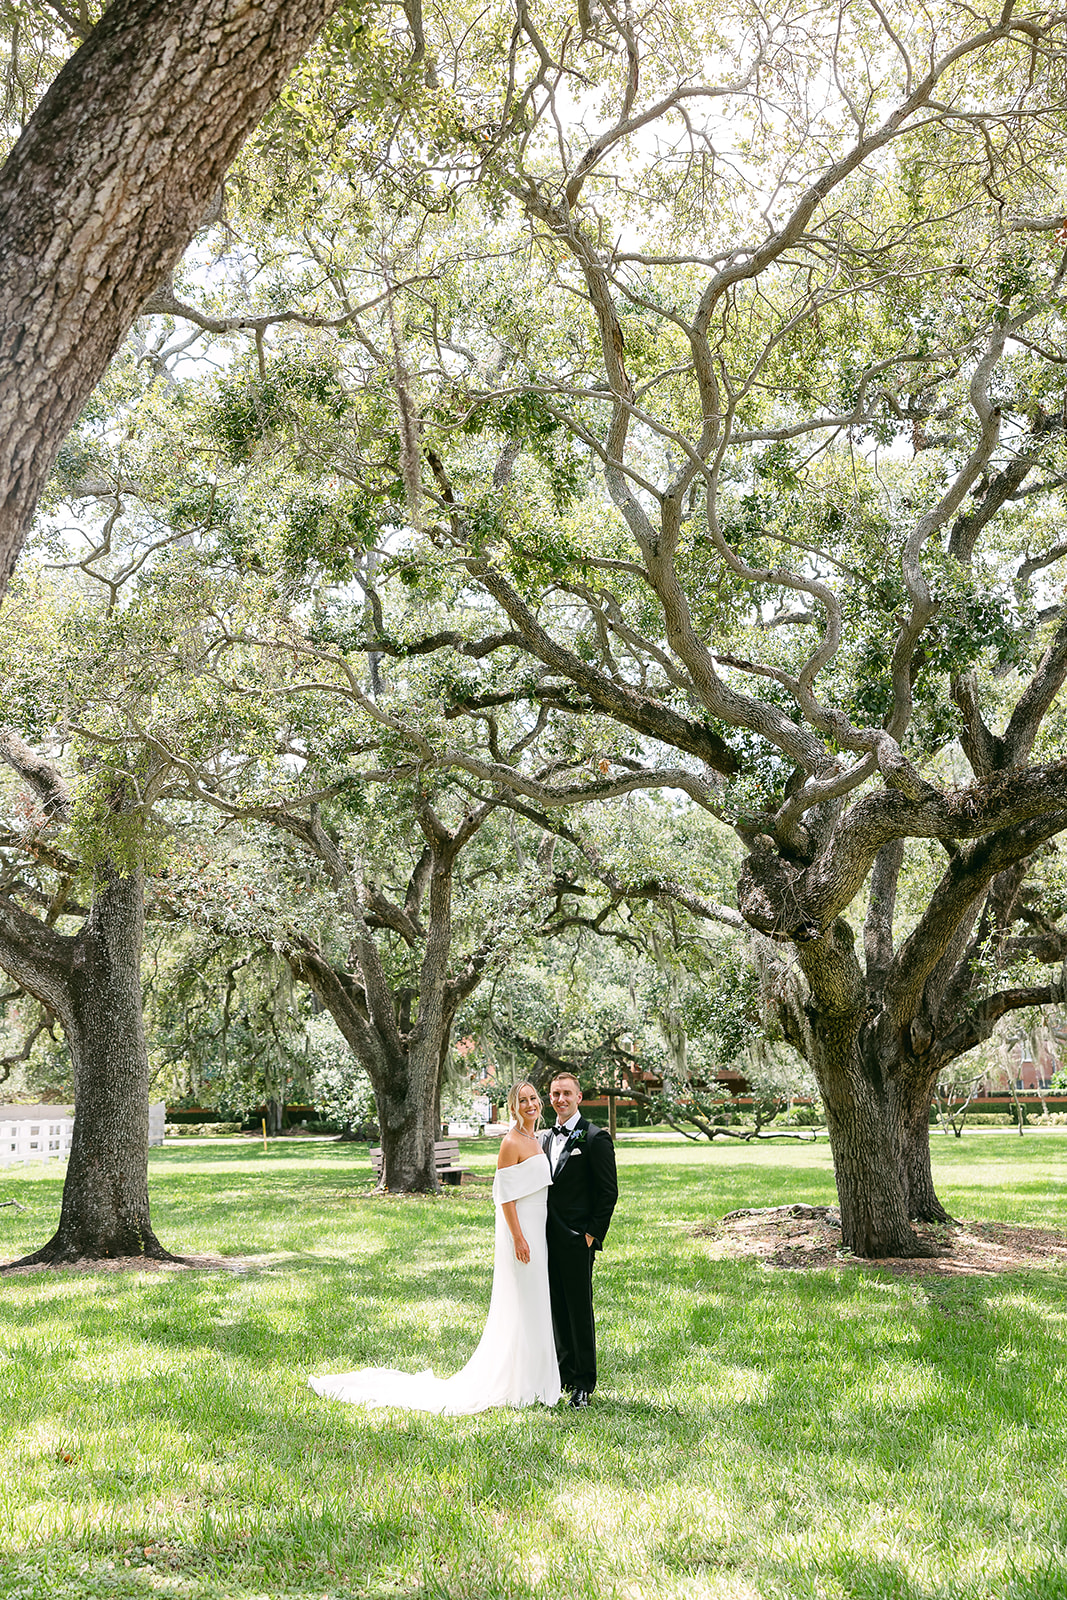 Traditional wedding day portrait, bride and groom in grove of trees. high end elopement wedding in tampa florida. sarah bradshaw photography.